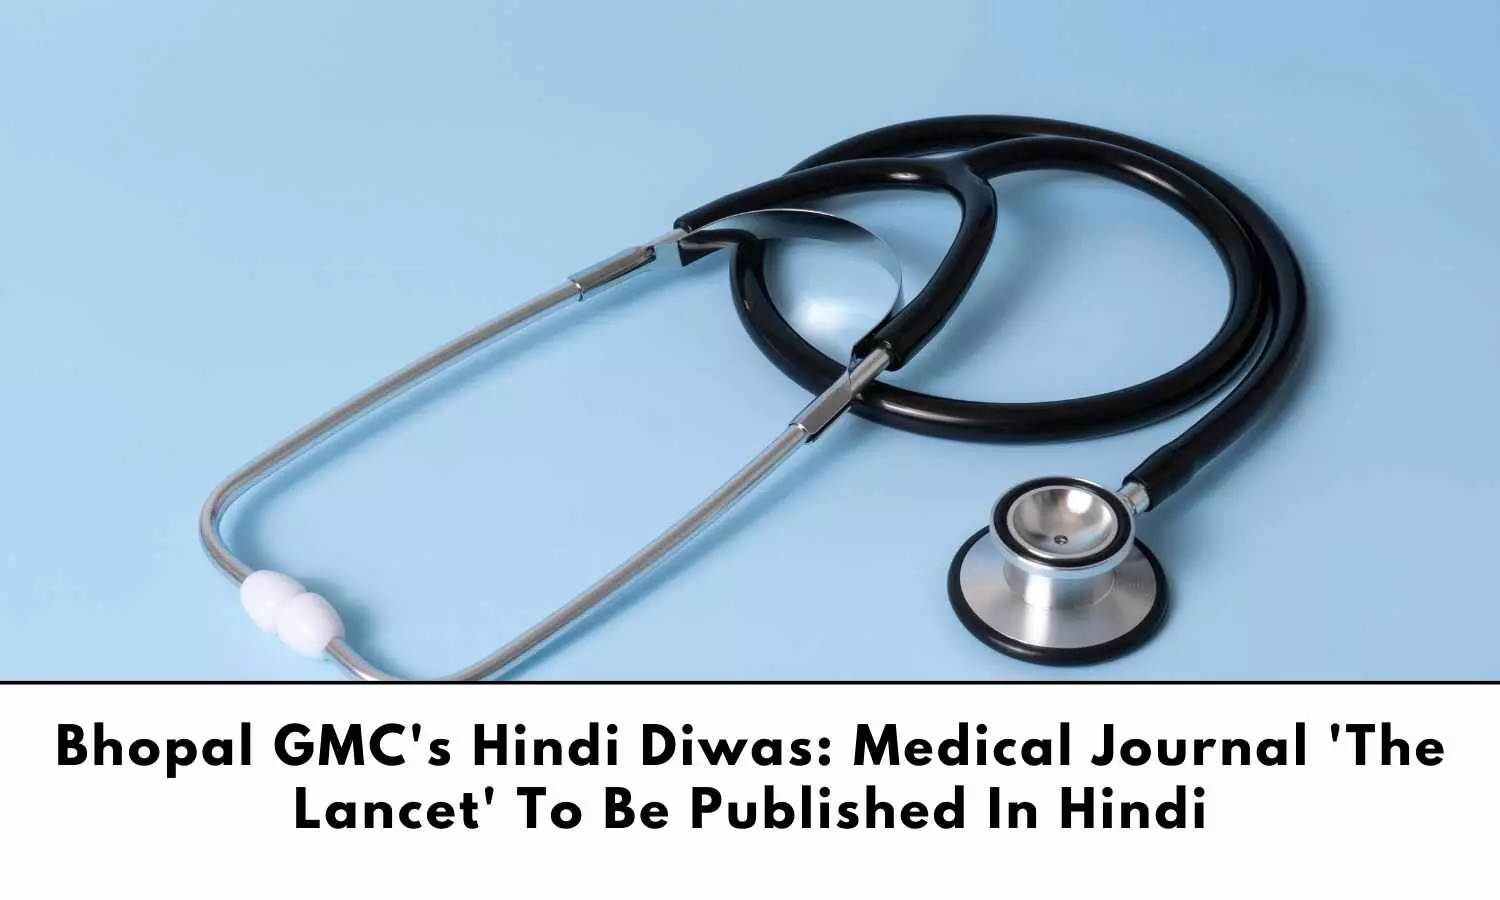 Medical Journal The Lancet to be published in Hindi